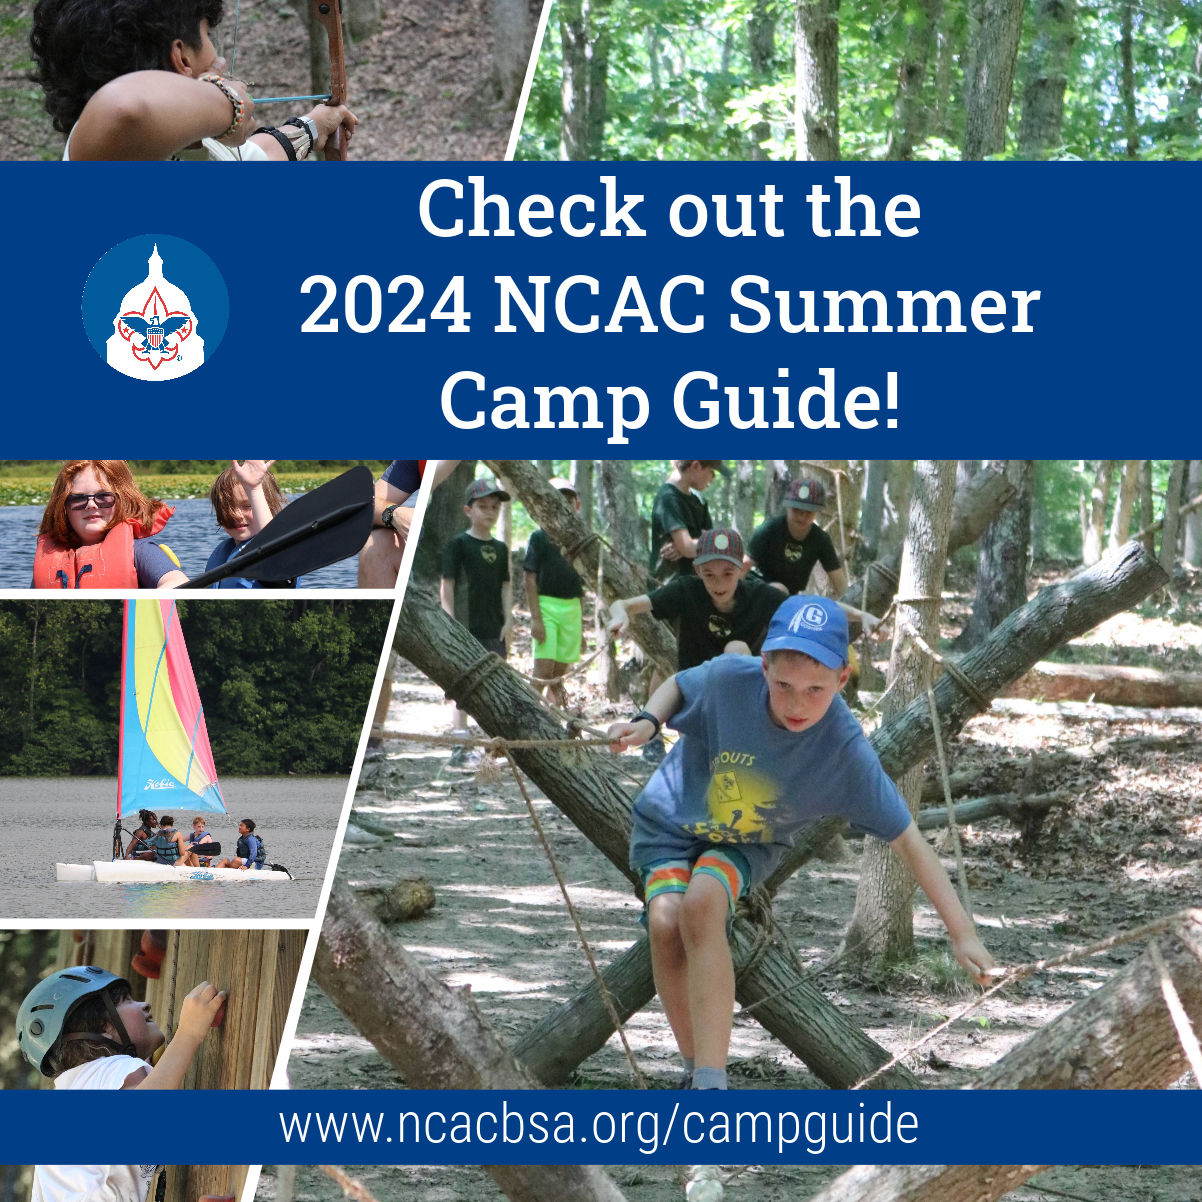 2024 NCAC Summer Camp Guide Now Available We Own Adventure